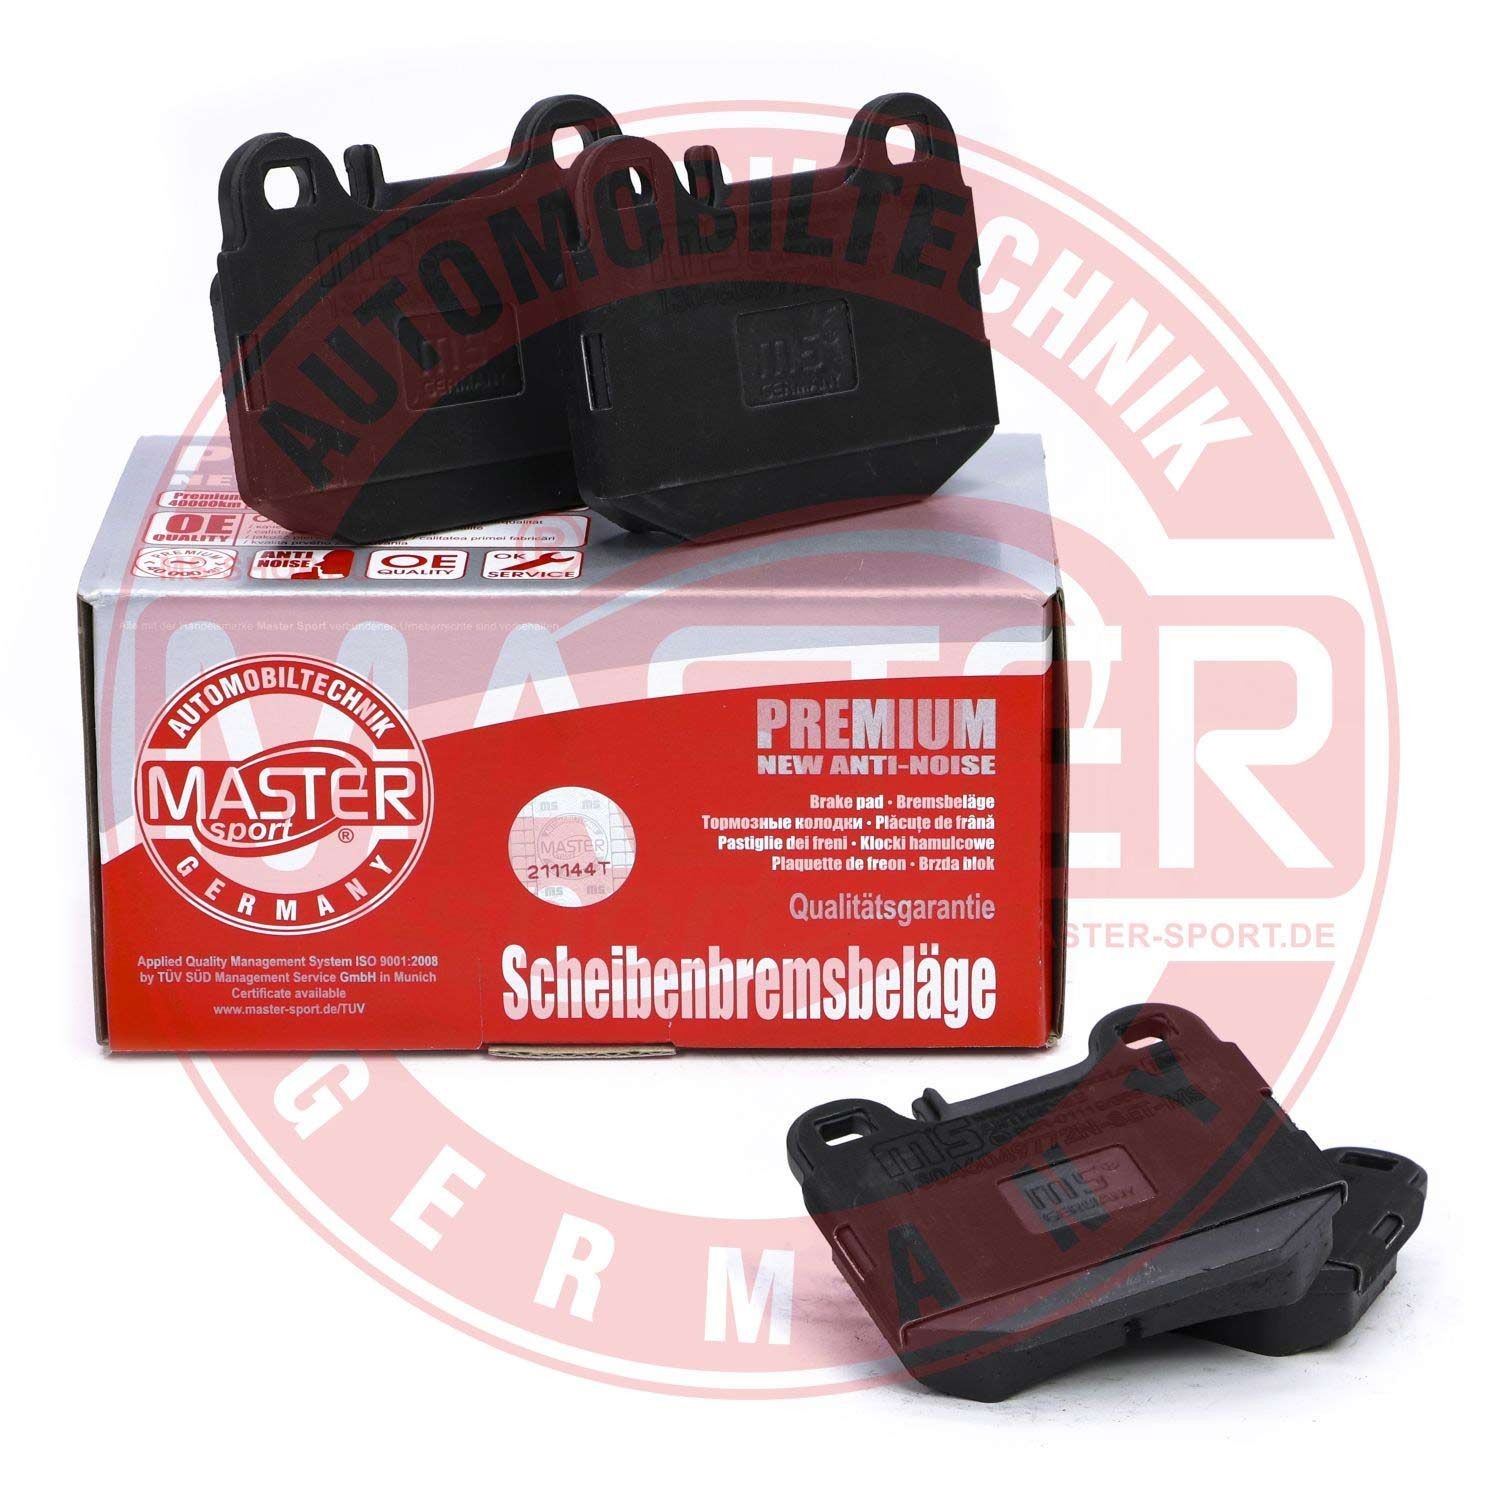 13046049772N-SET-MS Set of brake pads HD236049772 MASTER-SPORT Rear Axle, prepared for wear indicator, excl. wear warning contact, with anti-squeak plate